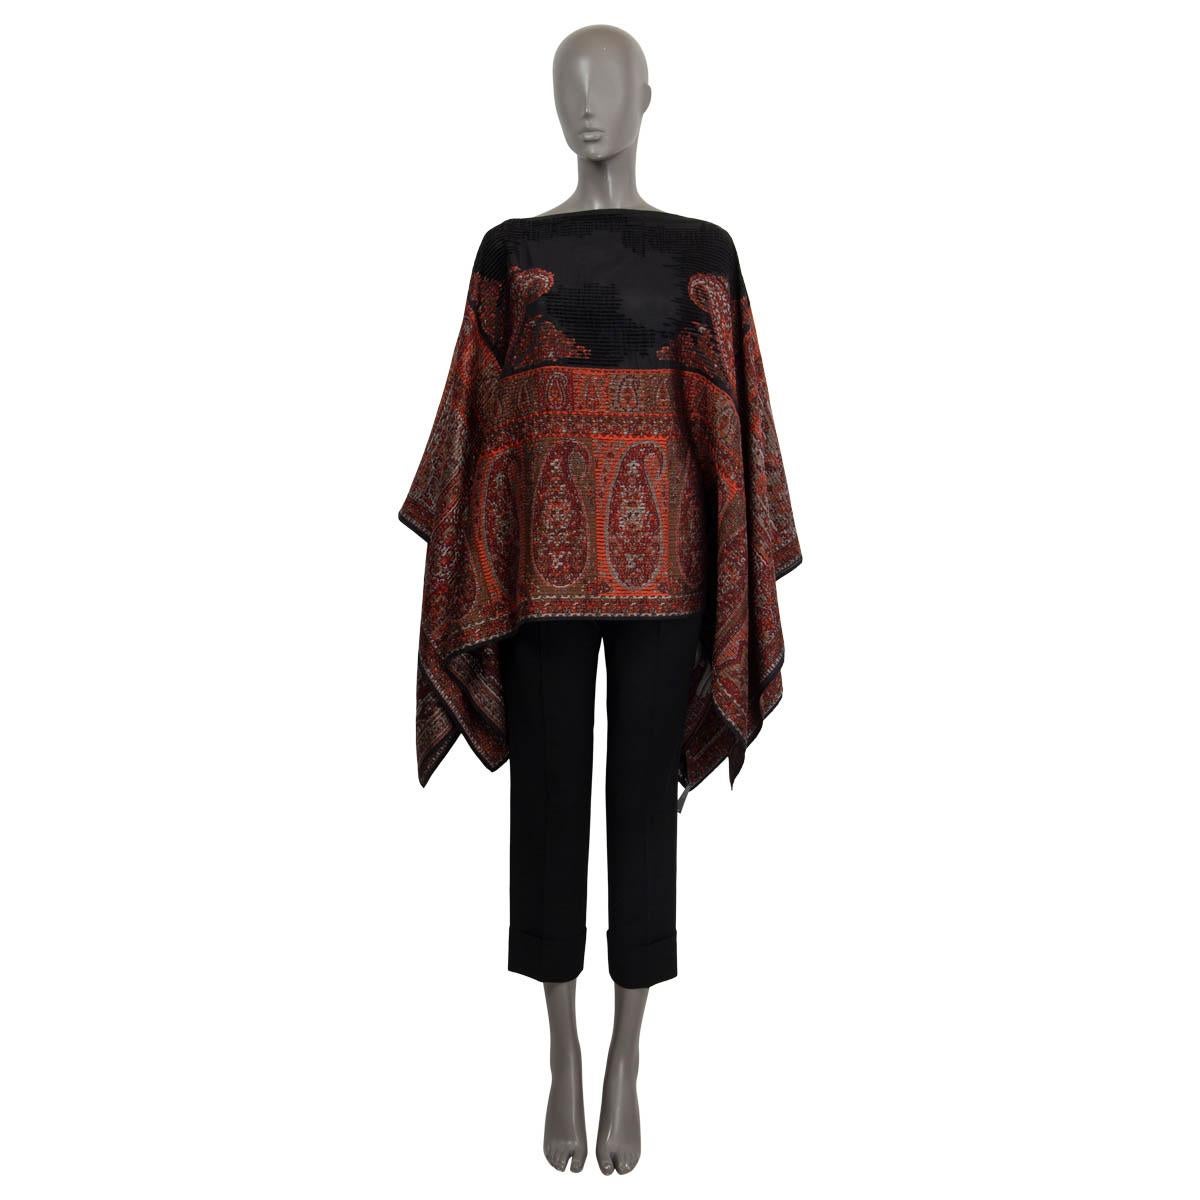 100% authentic Etro embroidered paisley poncho blouse in black, burgundy, brown and burnt orange polyester (41%), viscose (26%), silk (24%) and modal (9%). Unlined. Has been worn and is in excellent condition. 

2019 Fall/Winter

Measurements
Tag